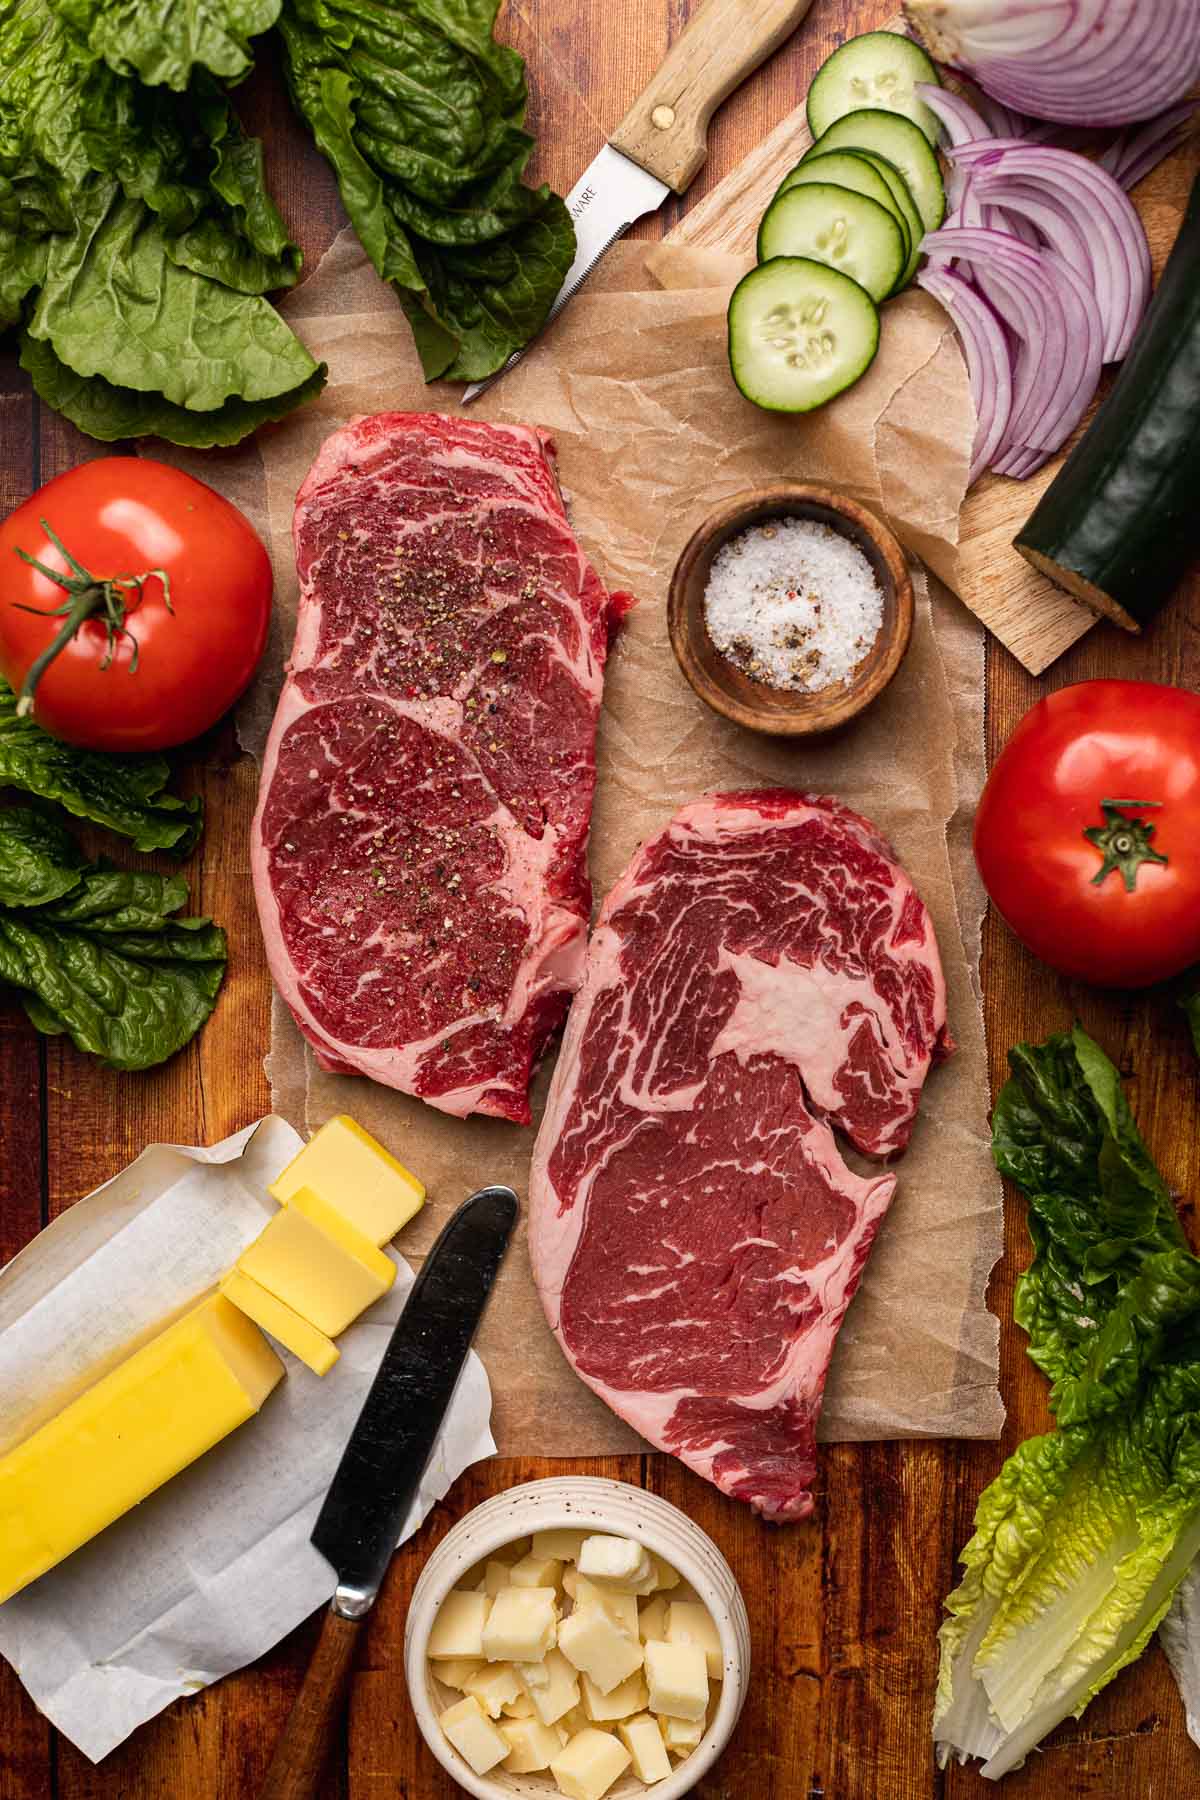 Steak Salad ingredients and raw steaks on cutting board